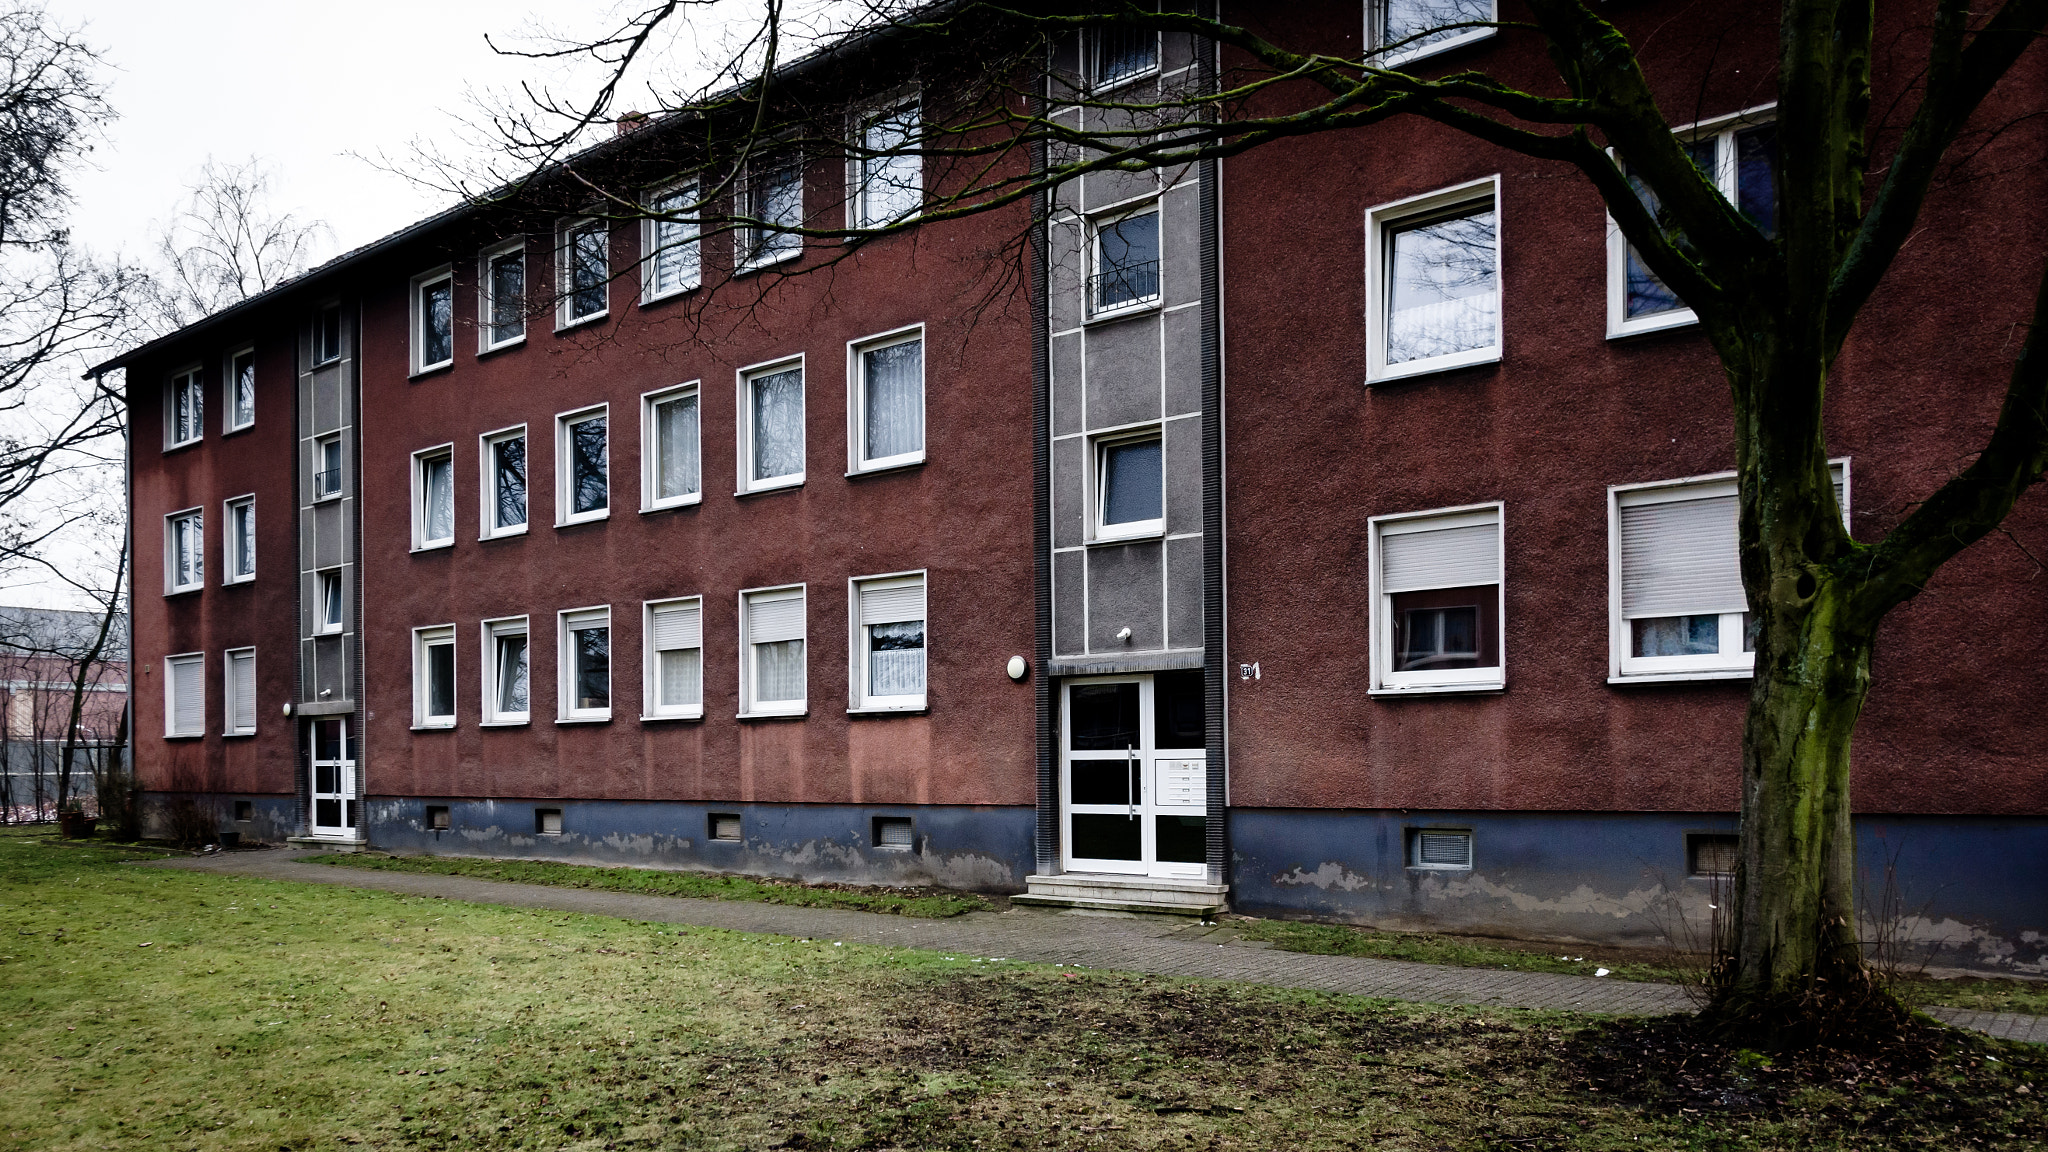 Pentax K-3 II sample photo. Block of flats at the old opel factory photography